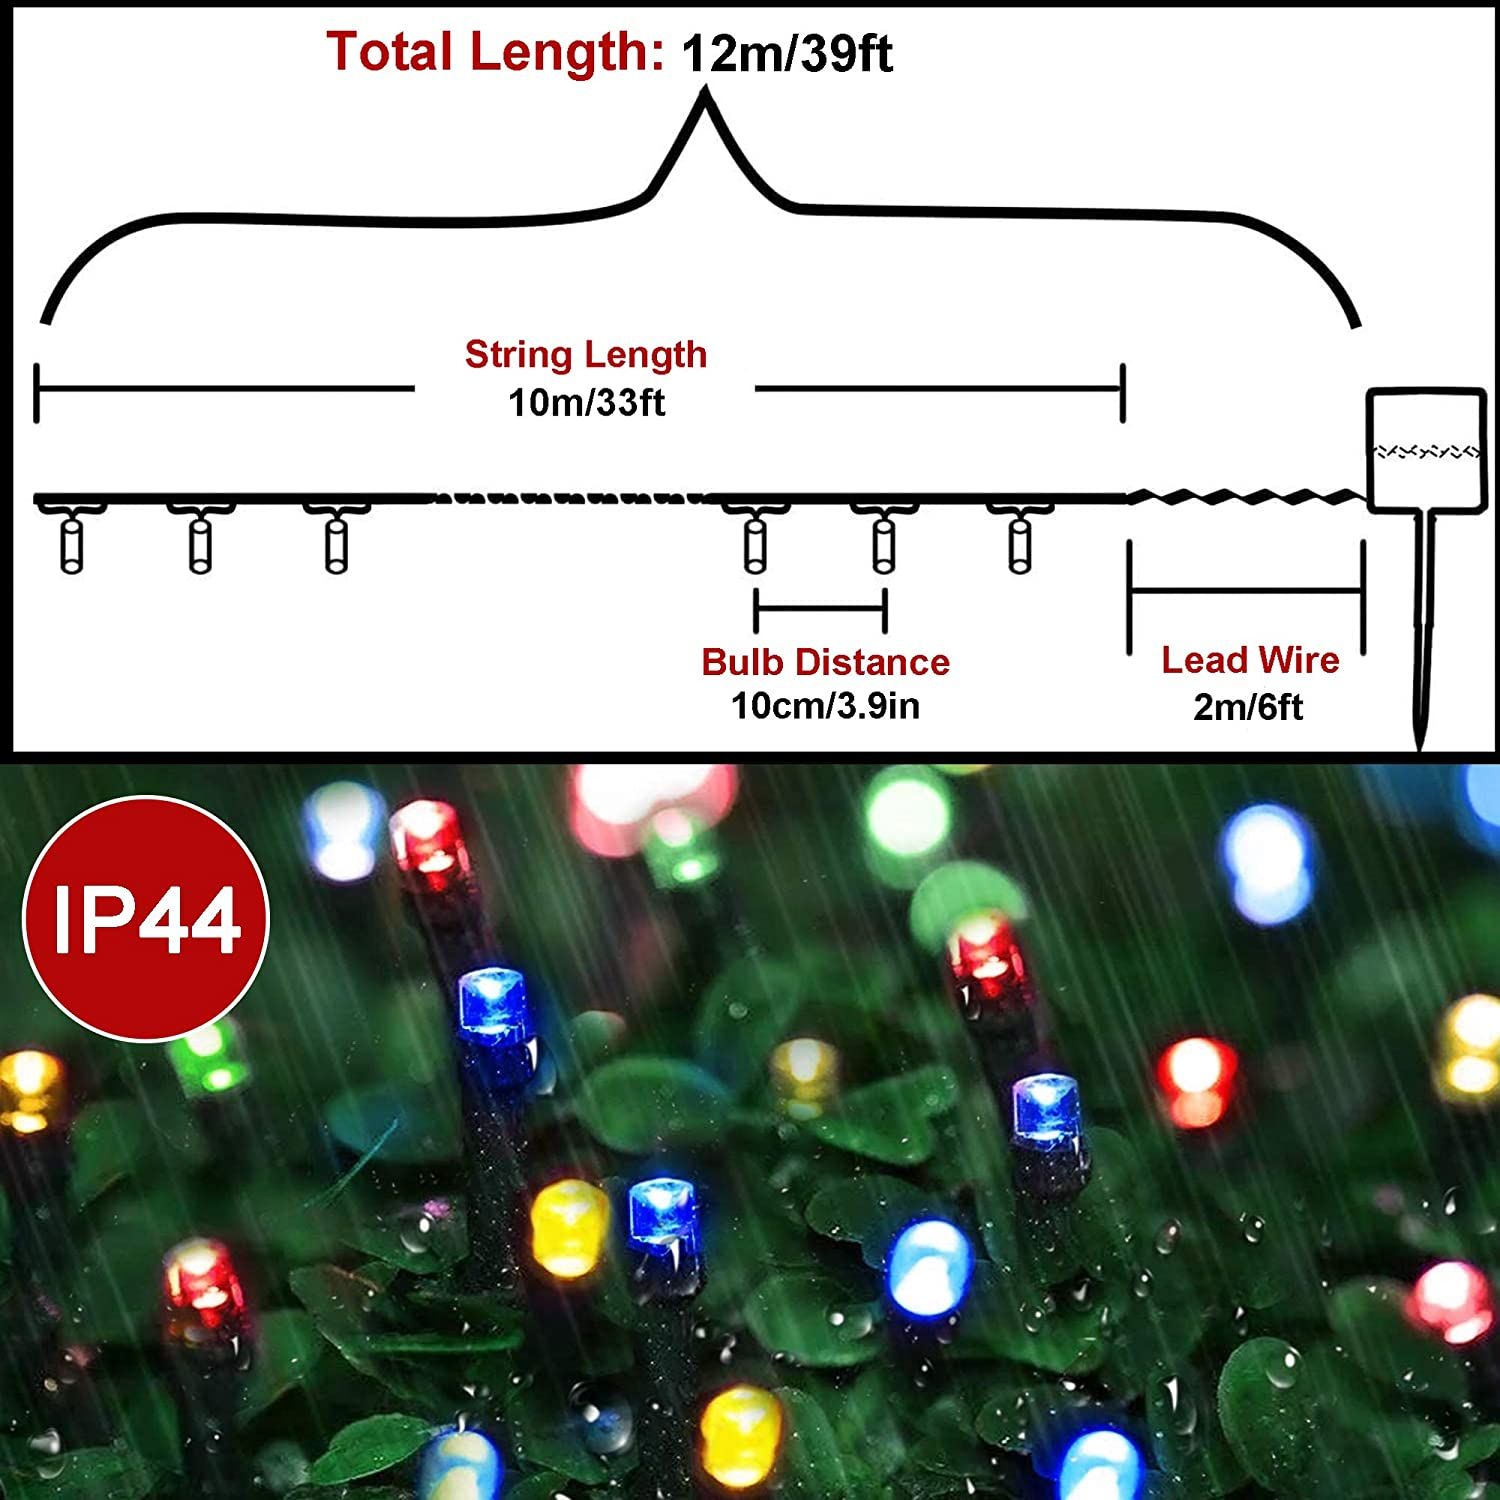 Rirool 100LED Solar Christmas Lights 39ft Waterproof Multicolor String Lights with 8 Modes for Gardens, Wedding, Party, Christmas Tree, Outdoor Xmas Decorations - image 2 of 9